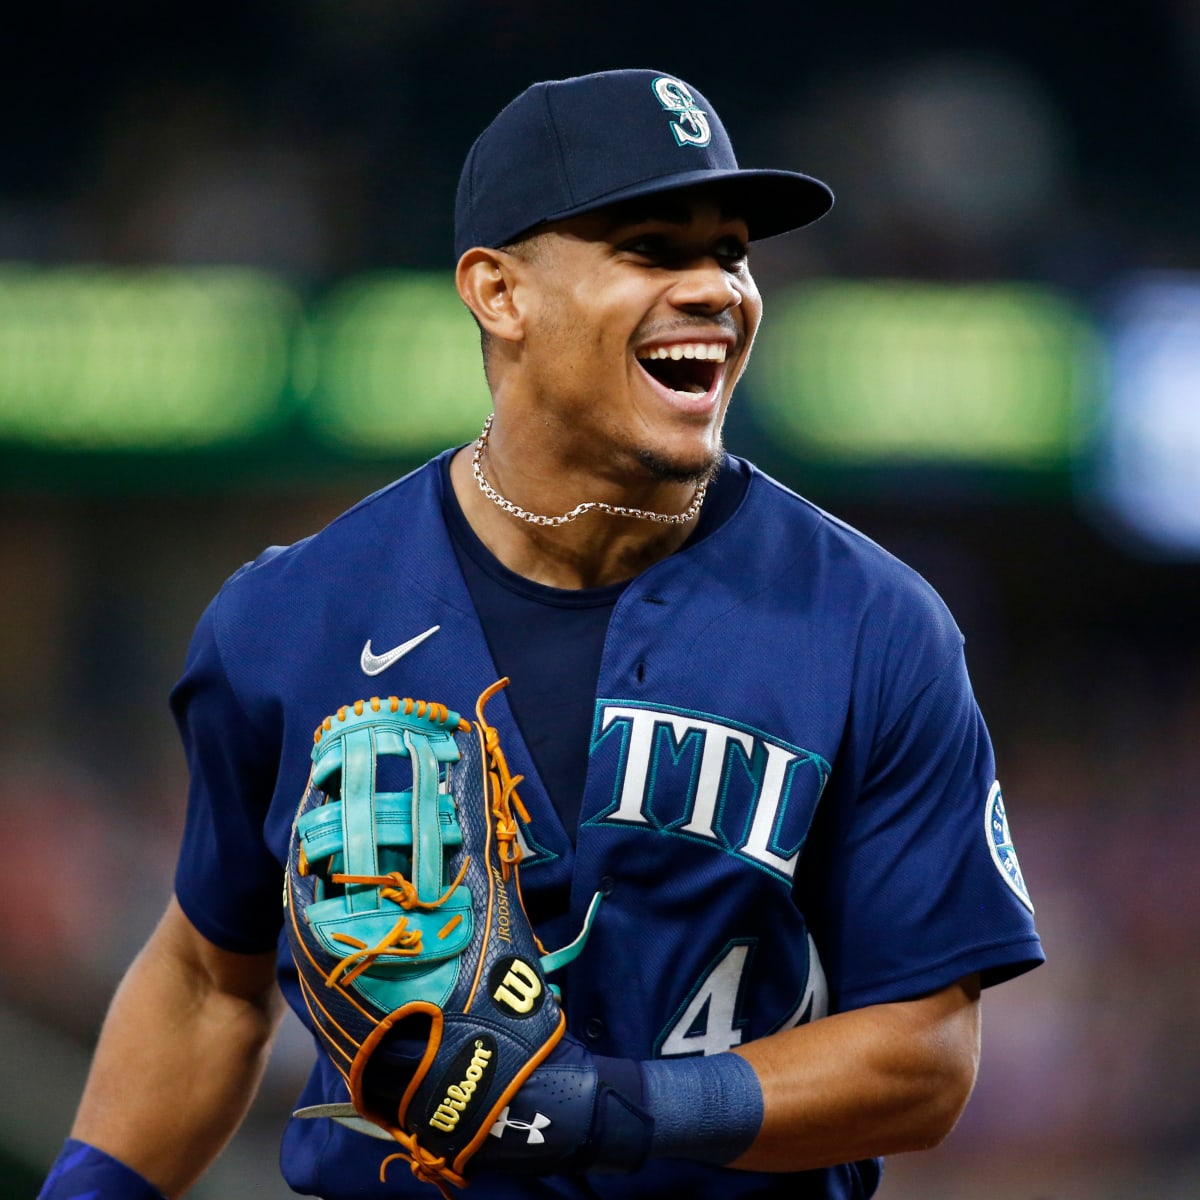 American League's Julio Rodriguez, of the Seattle Mariners, smiles